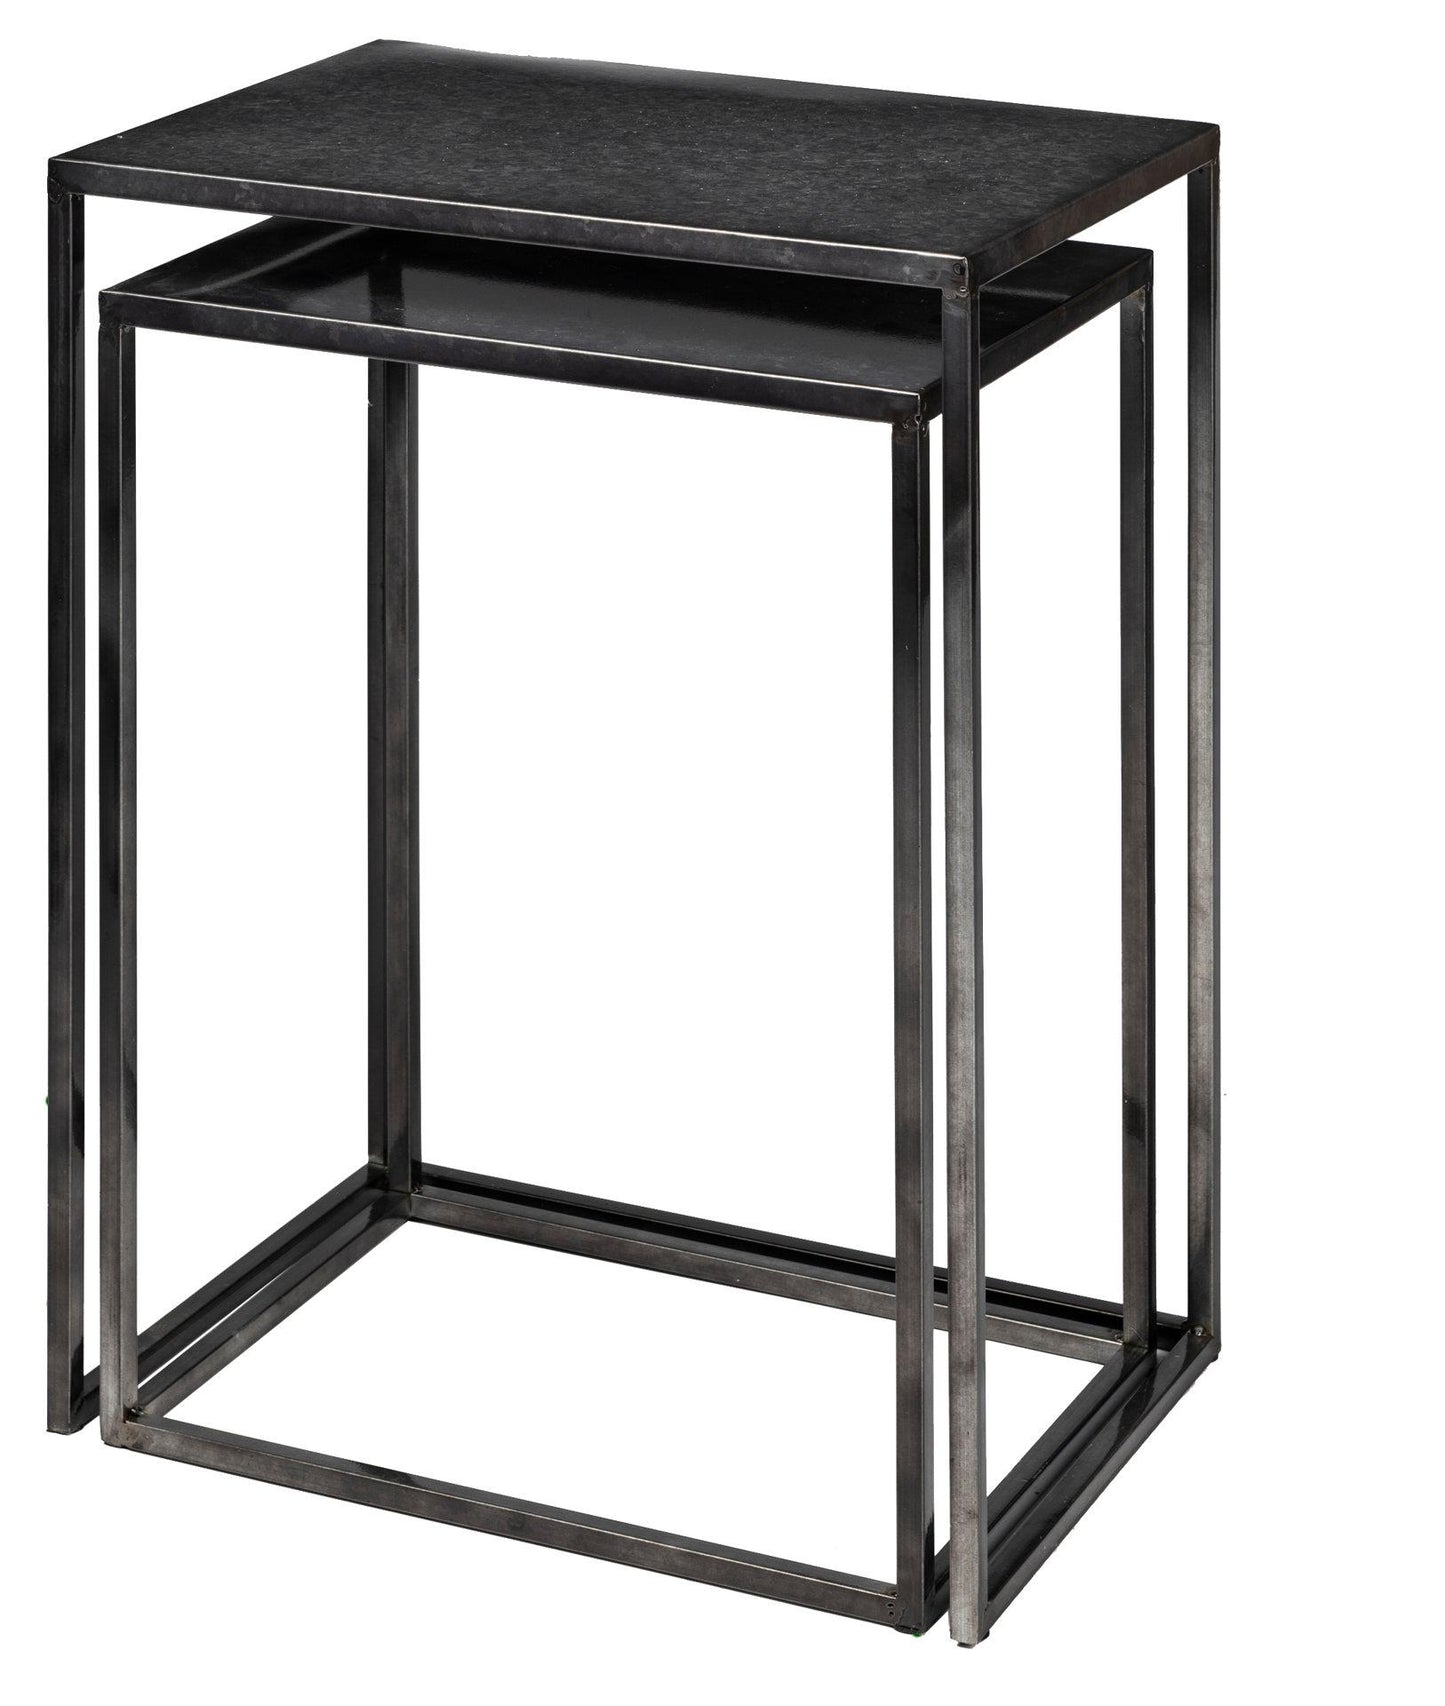 Kasey (Set of 2) 17.7L x 12.6W x 24.4H Galvanized Metal Nesting Accent Tables